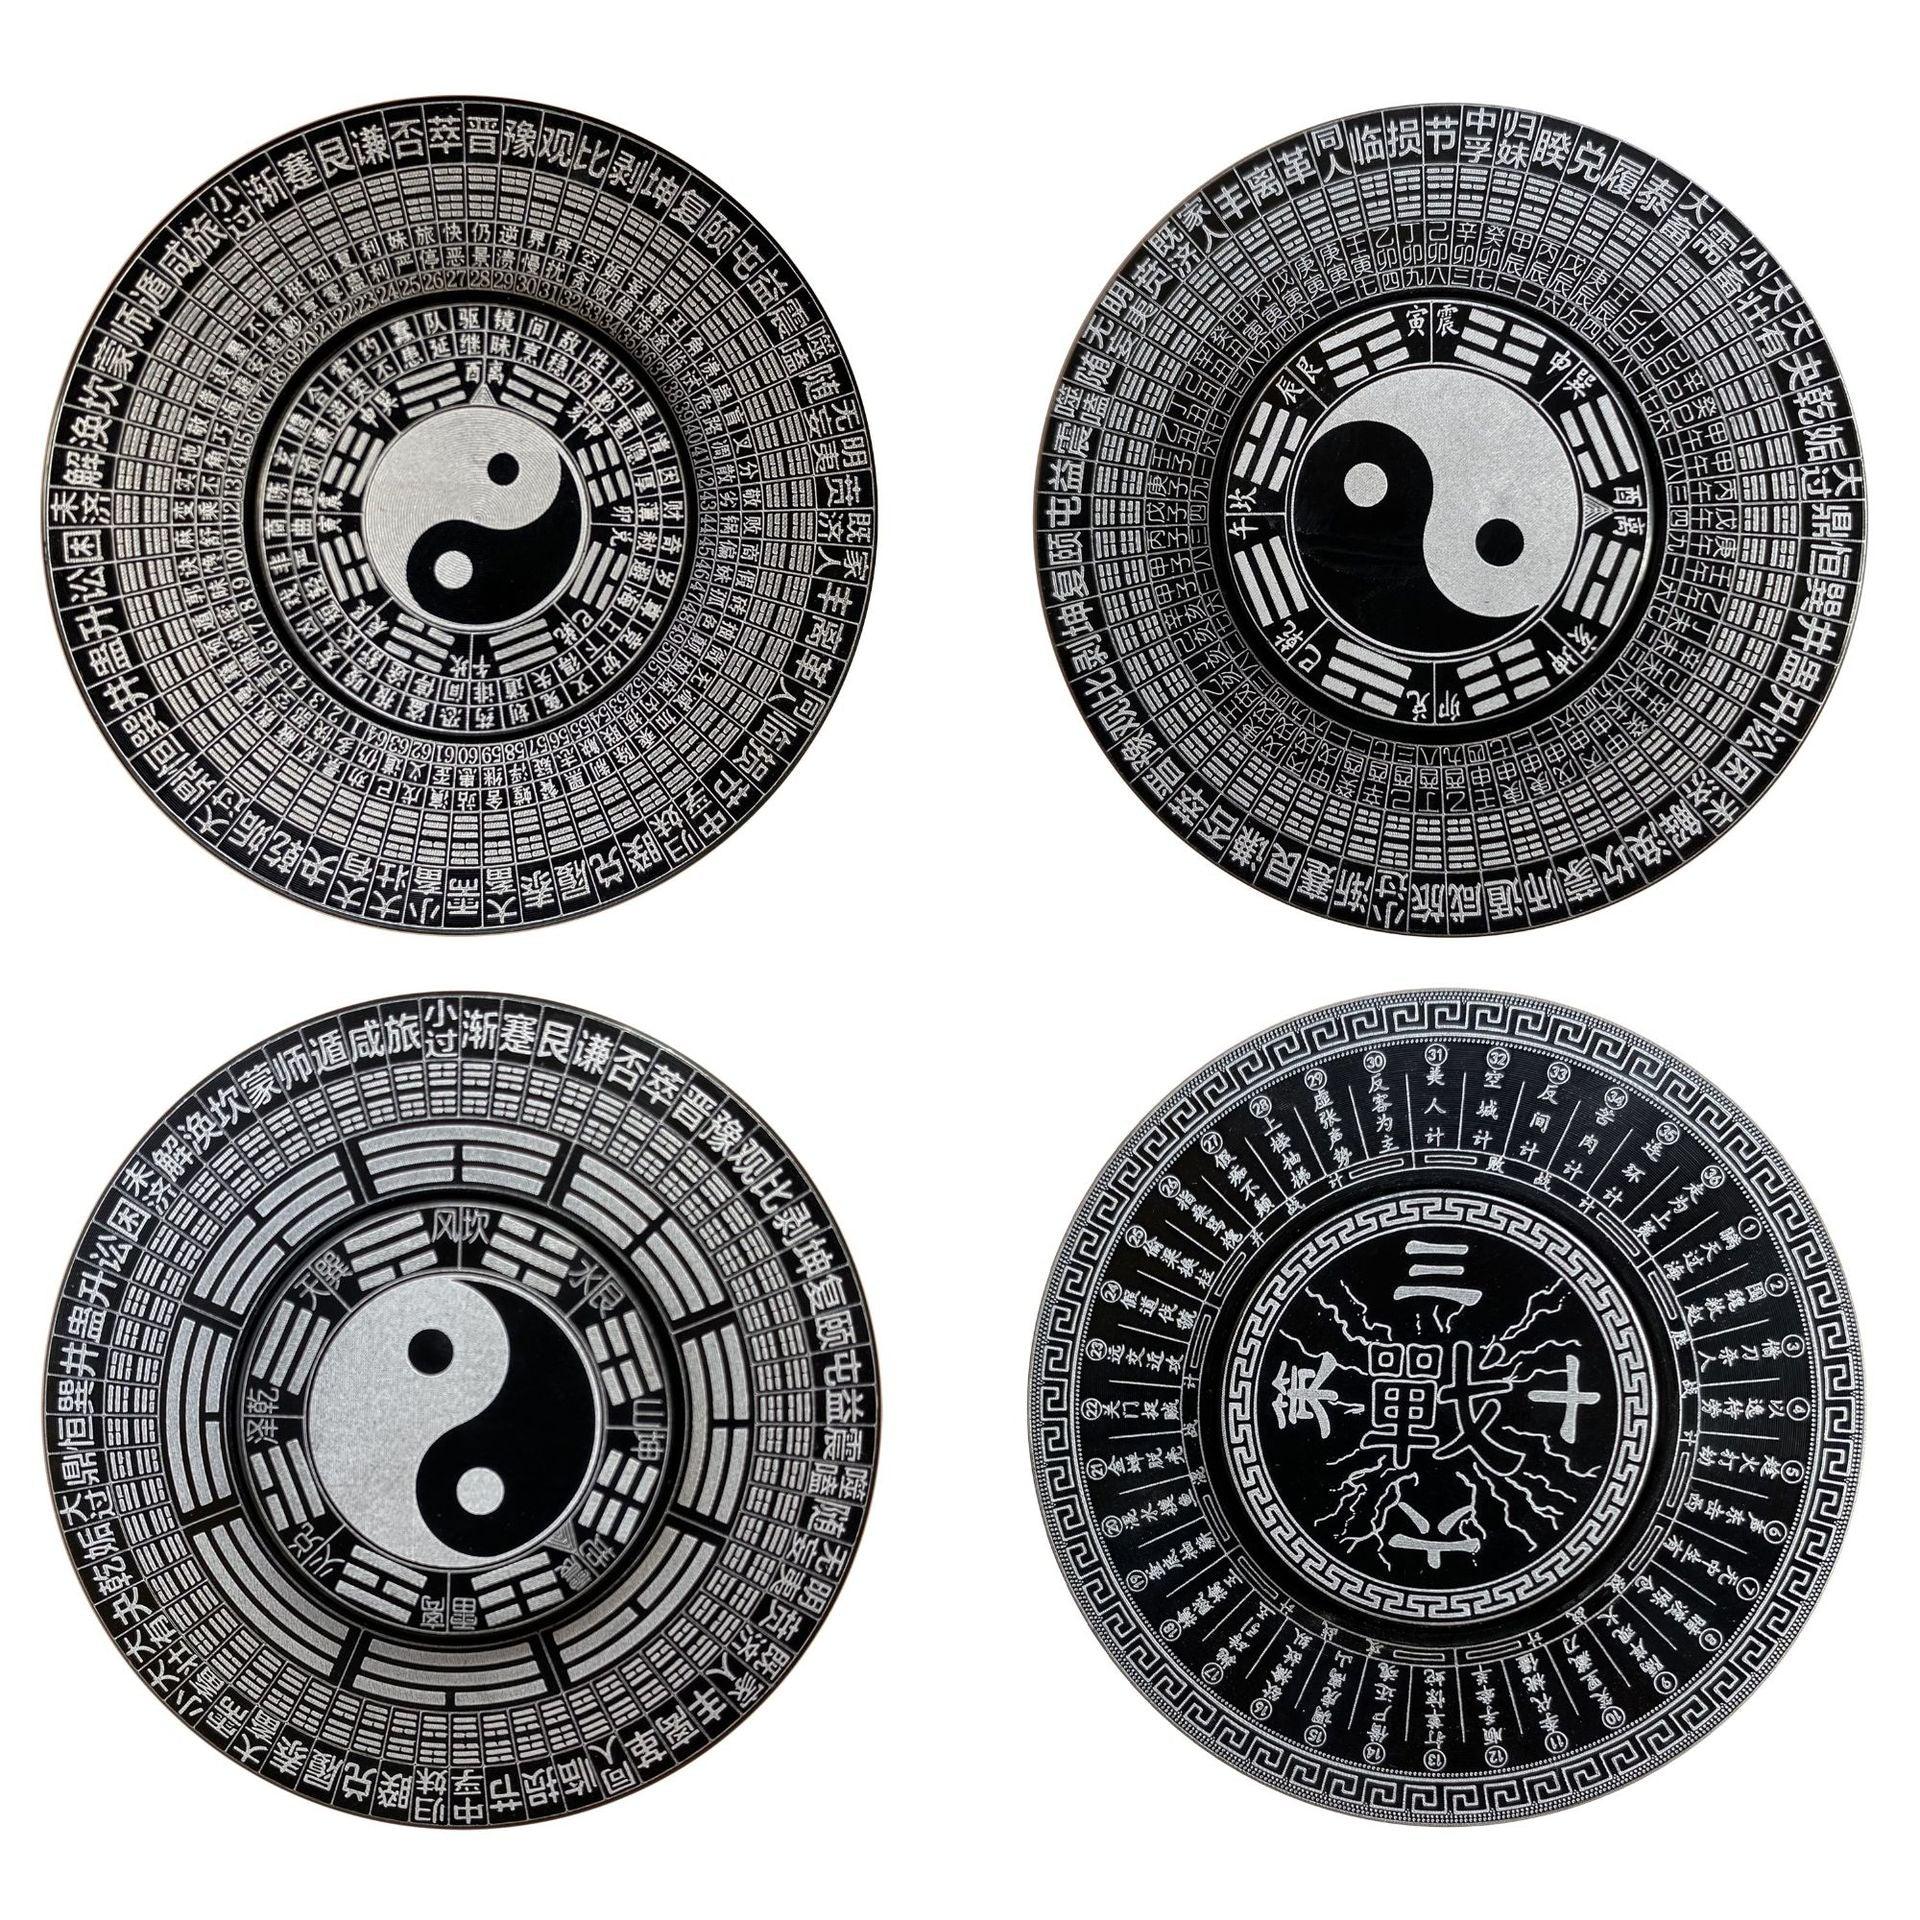 Chinese Style Fidget Spinner Toy Sensory Toy - Embrace Eastern Culture, Stress Relief and Rrelieve Anxiety - PANSEKtoy